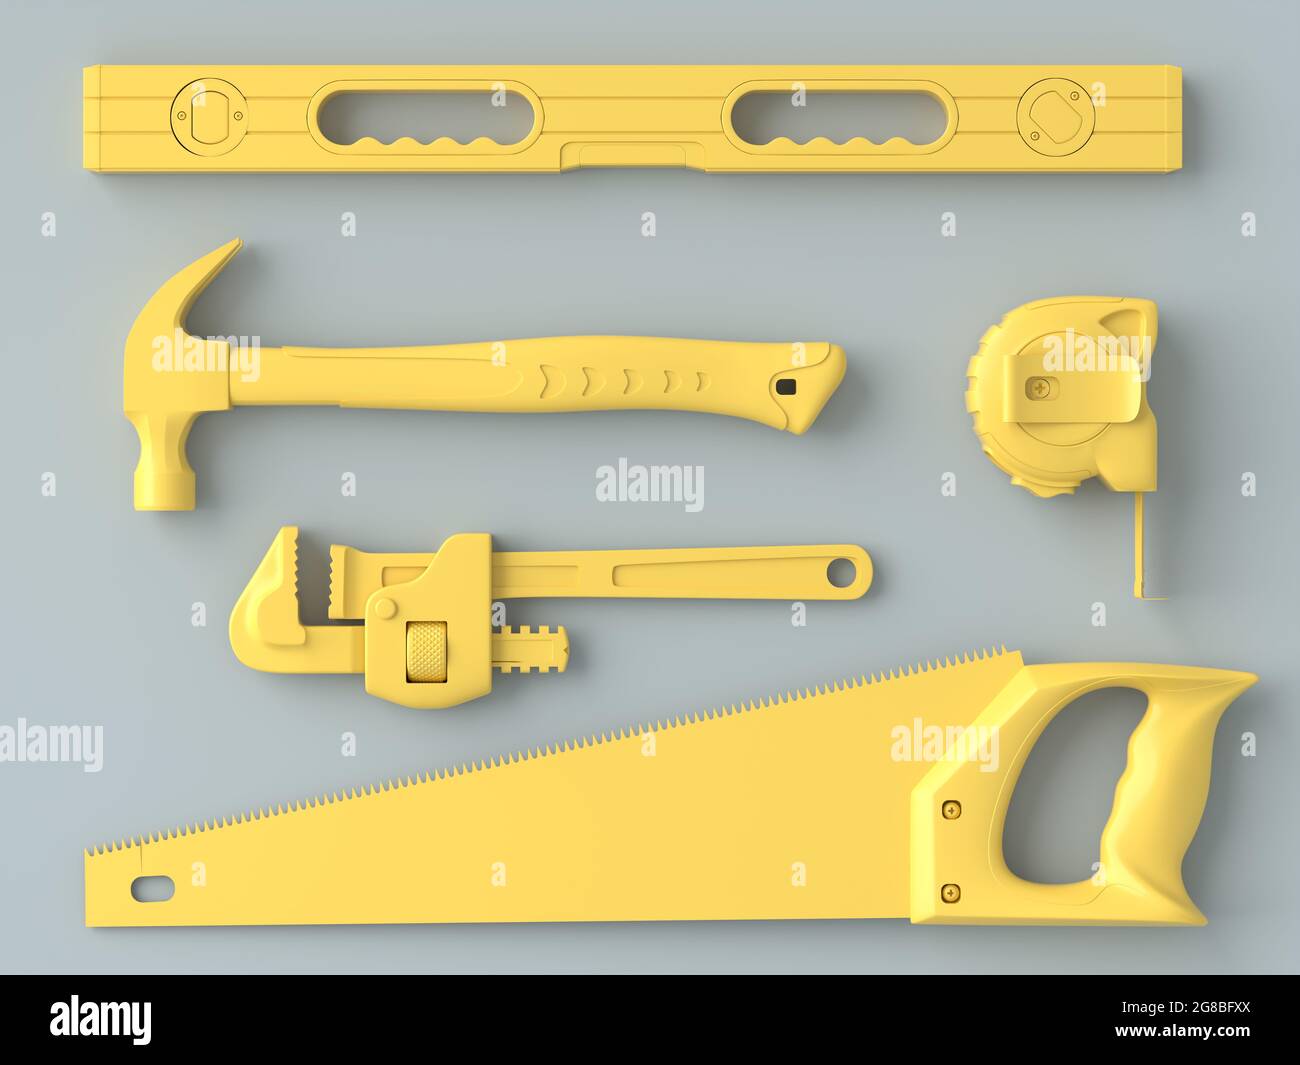 Top view of monochrome construction tools for repair and installation on grey and yellow background. 3d rendering and illustration of service banner f Stock Photo